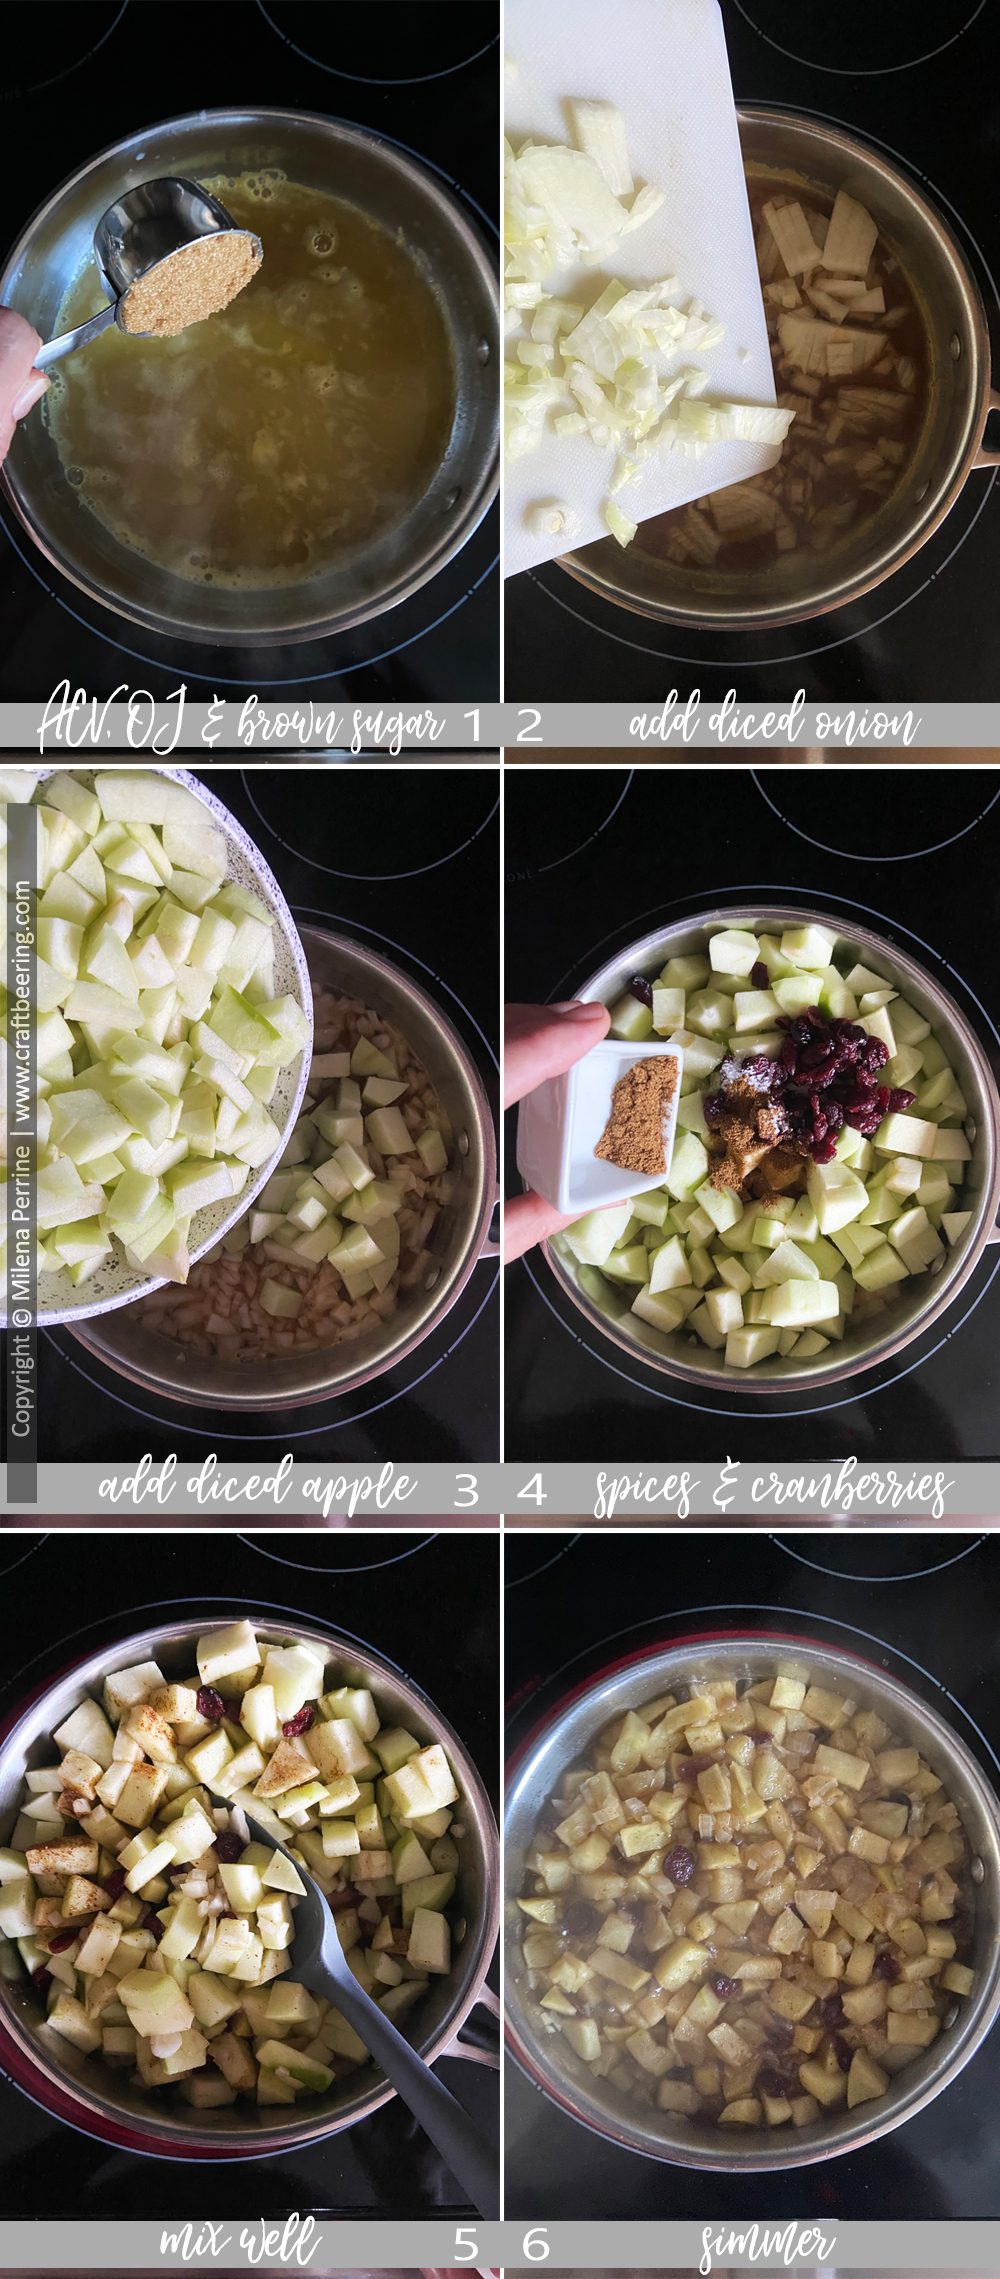 Apple chutney recipe step-by-step image collage.